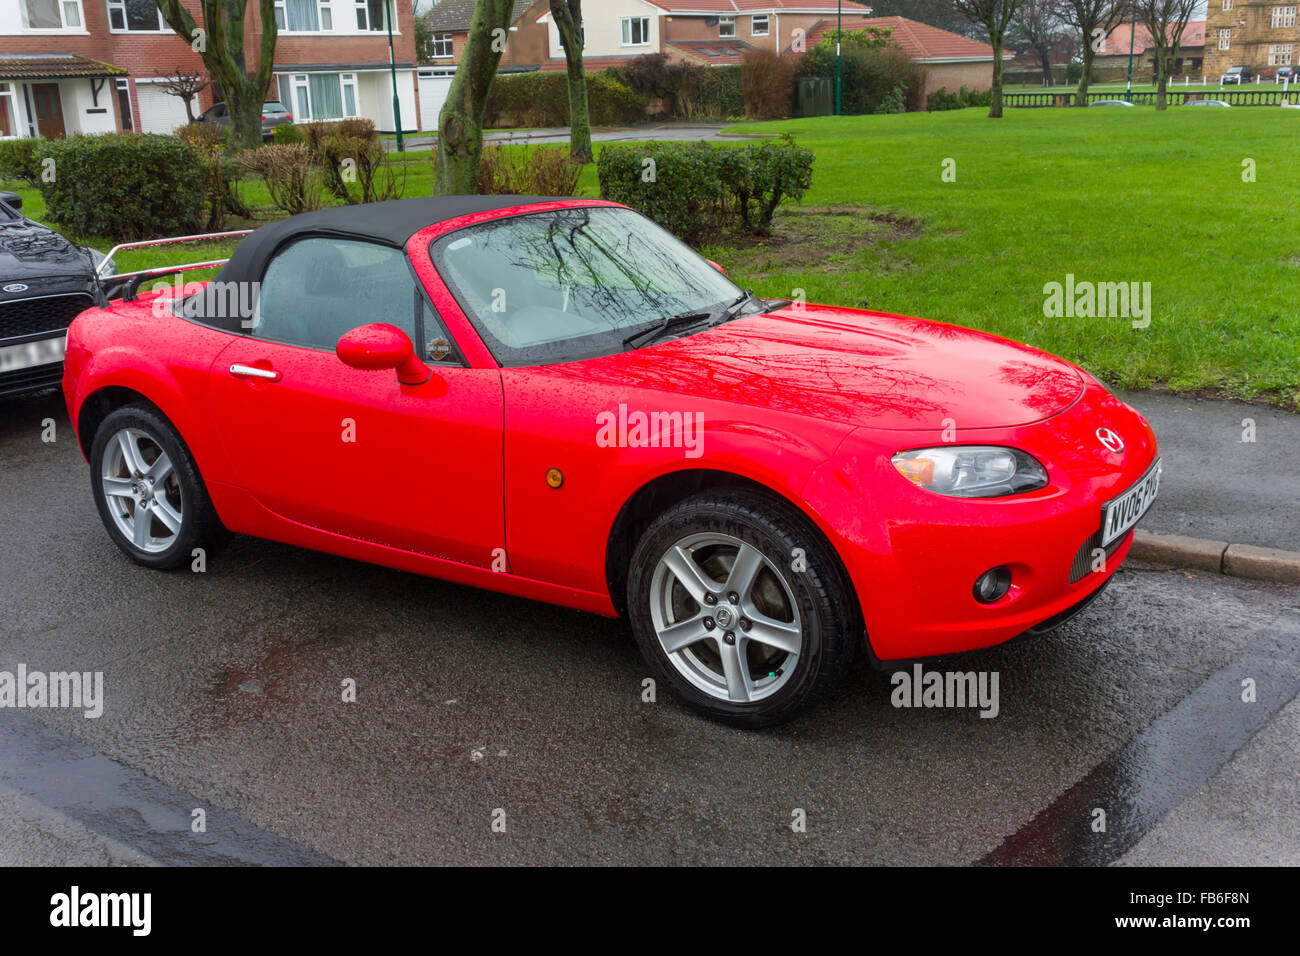 A bright red 2006 registered Mazda MX-3 soft top sports car parked in the rain Stock Photo